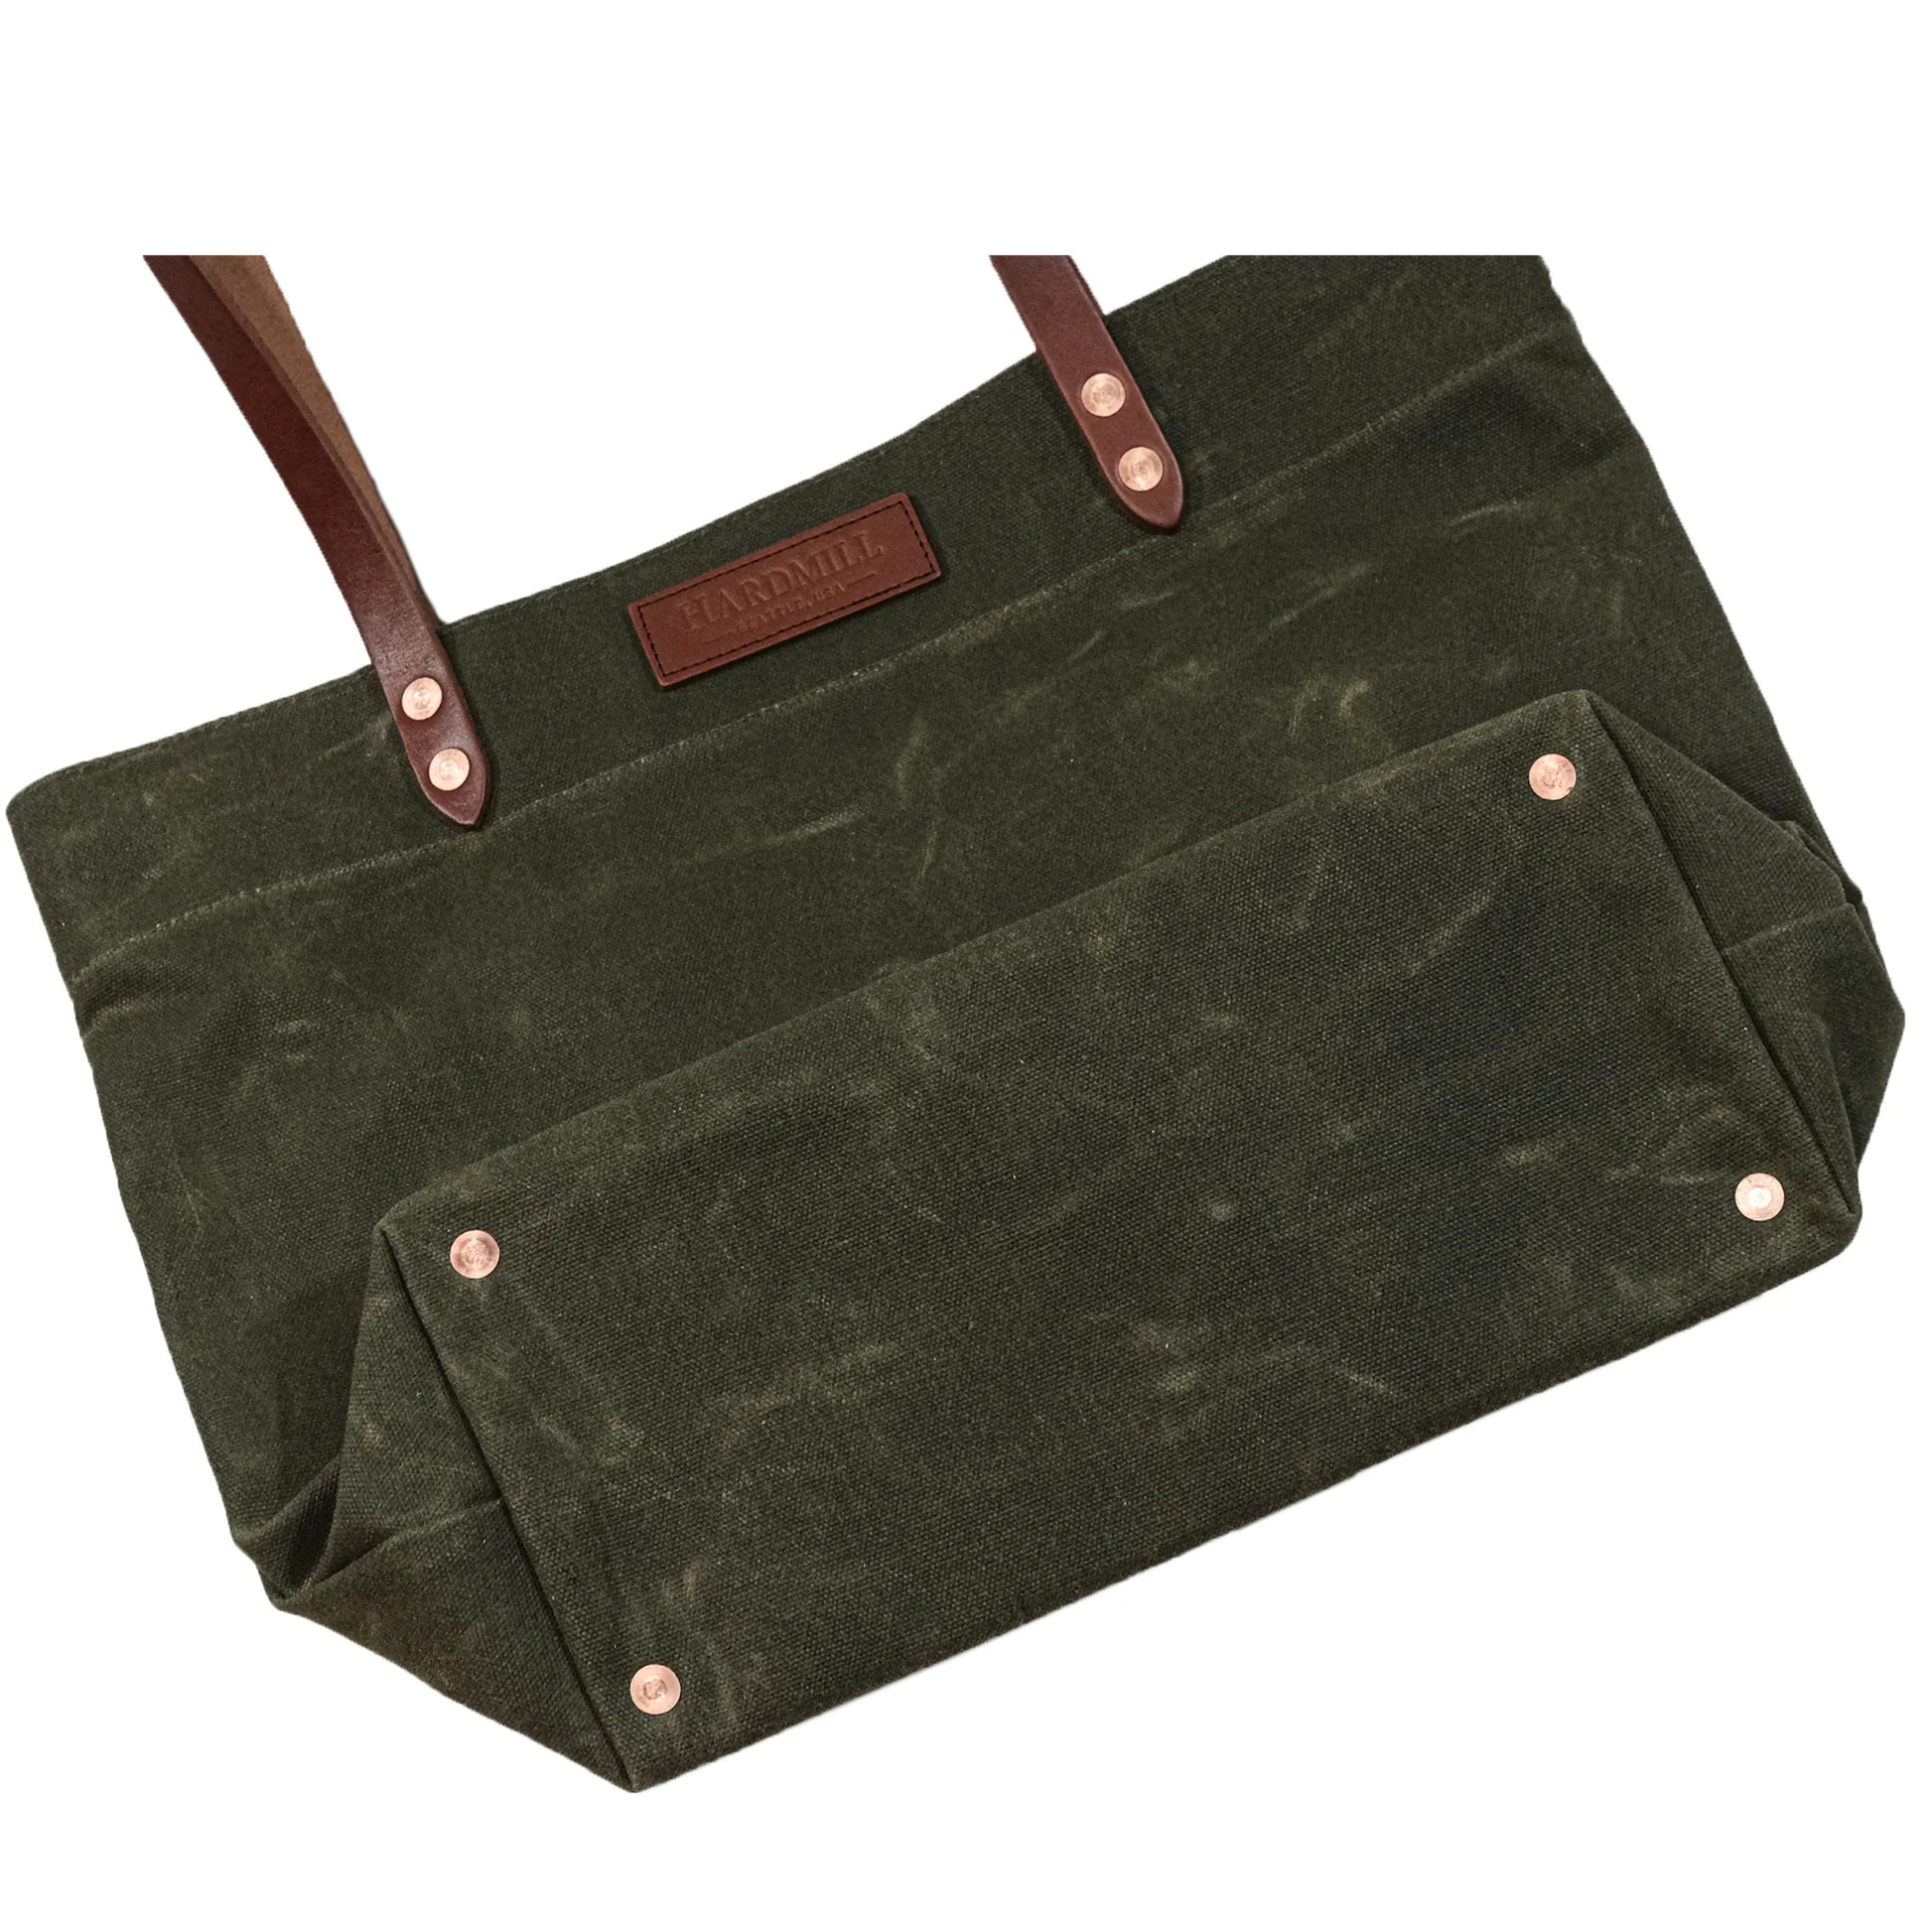 Market Tote - Waxed Canvas - Olive flat